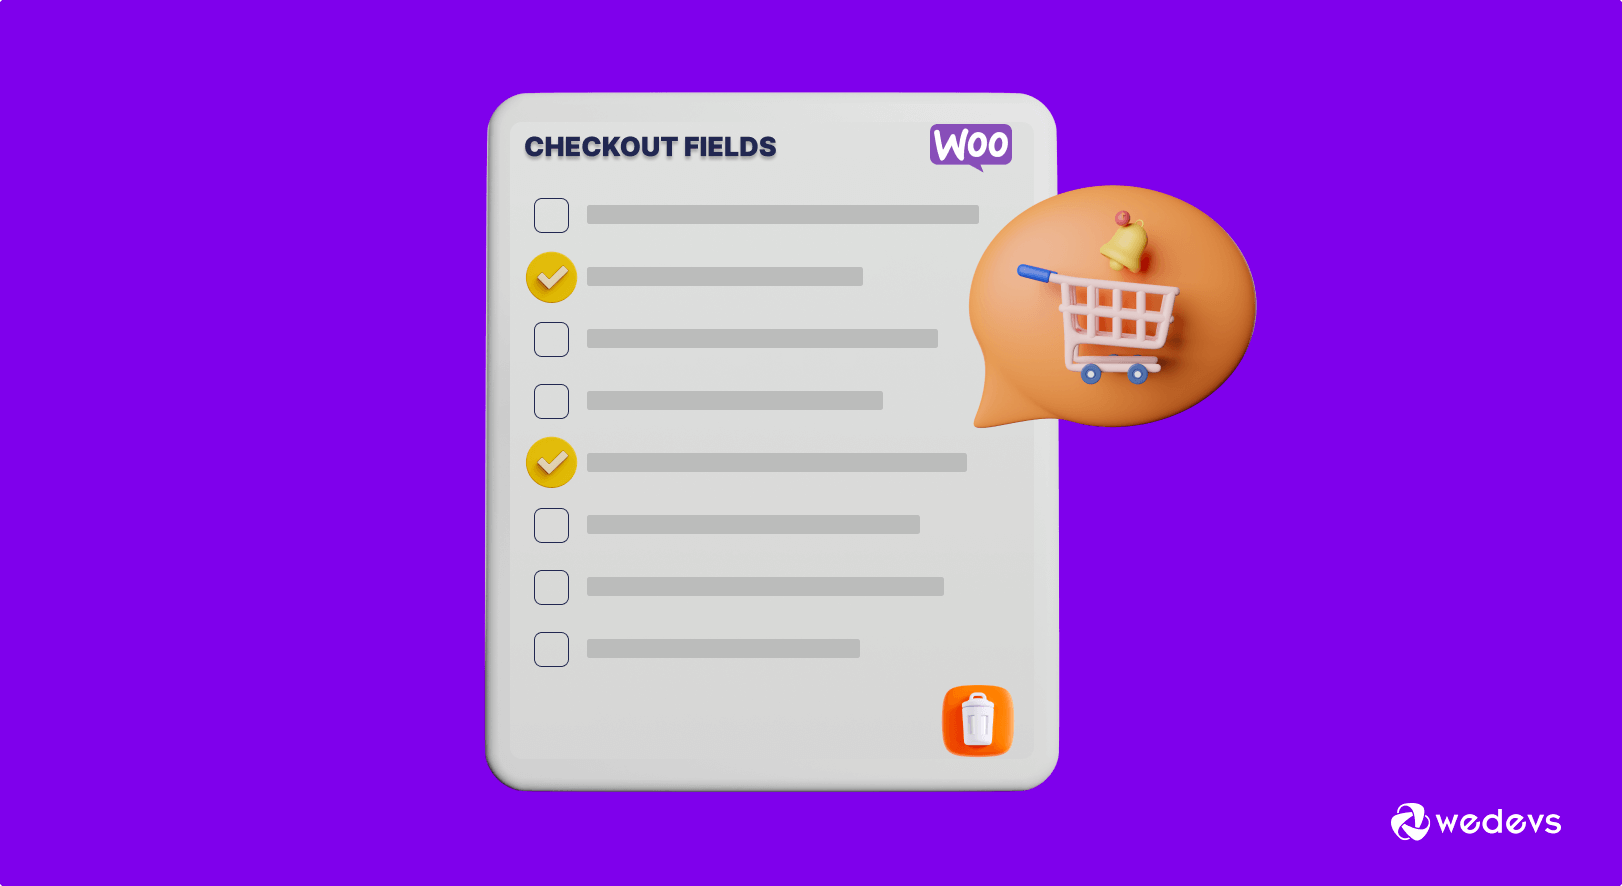 3 Easy Ways to Customize Your Checkout Fields on WooCommerce